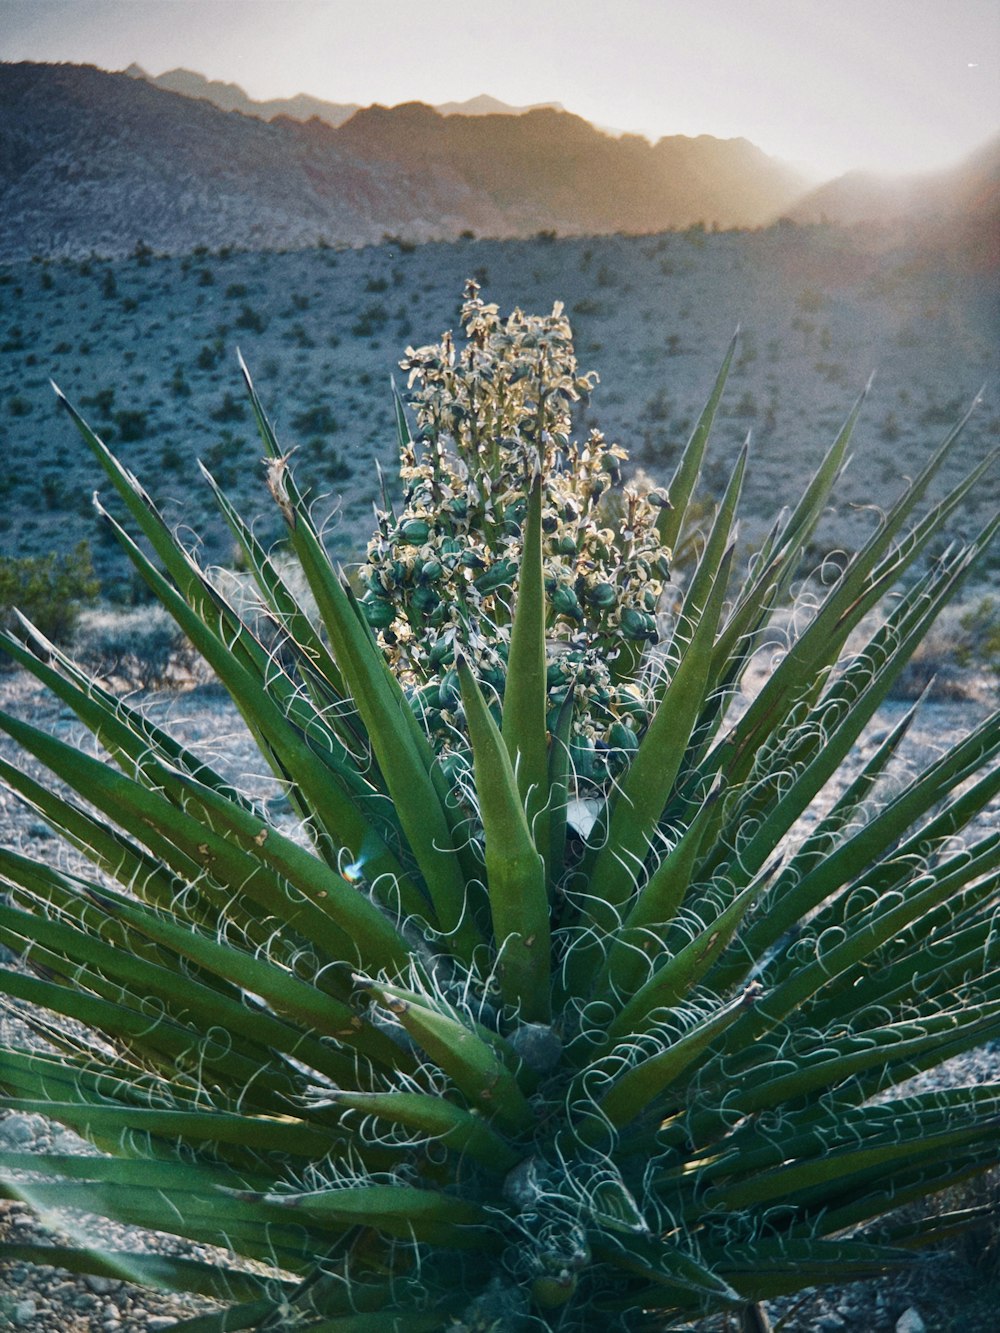 a large green plant in the middle of a desert